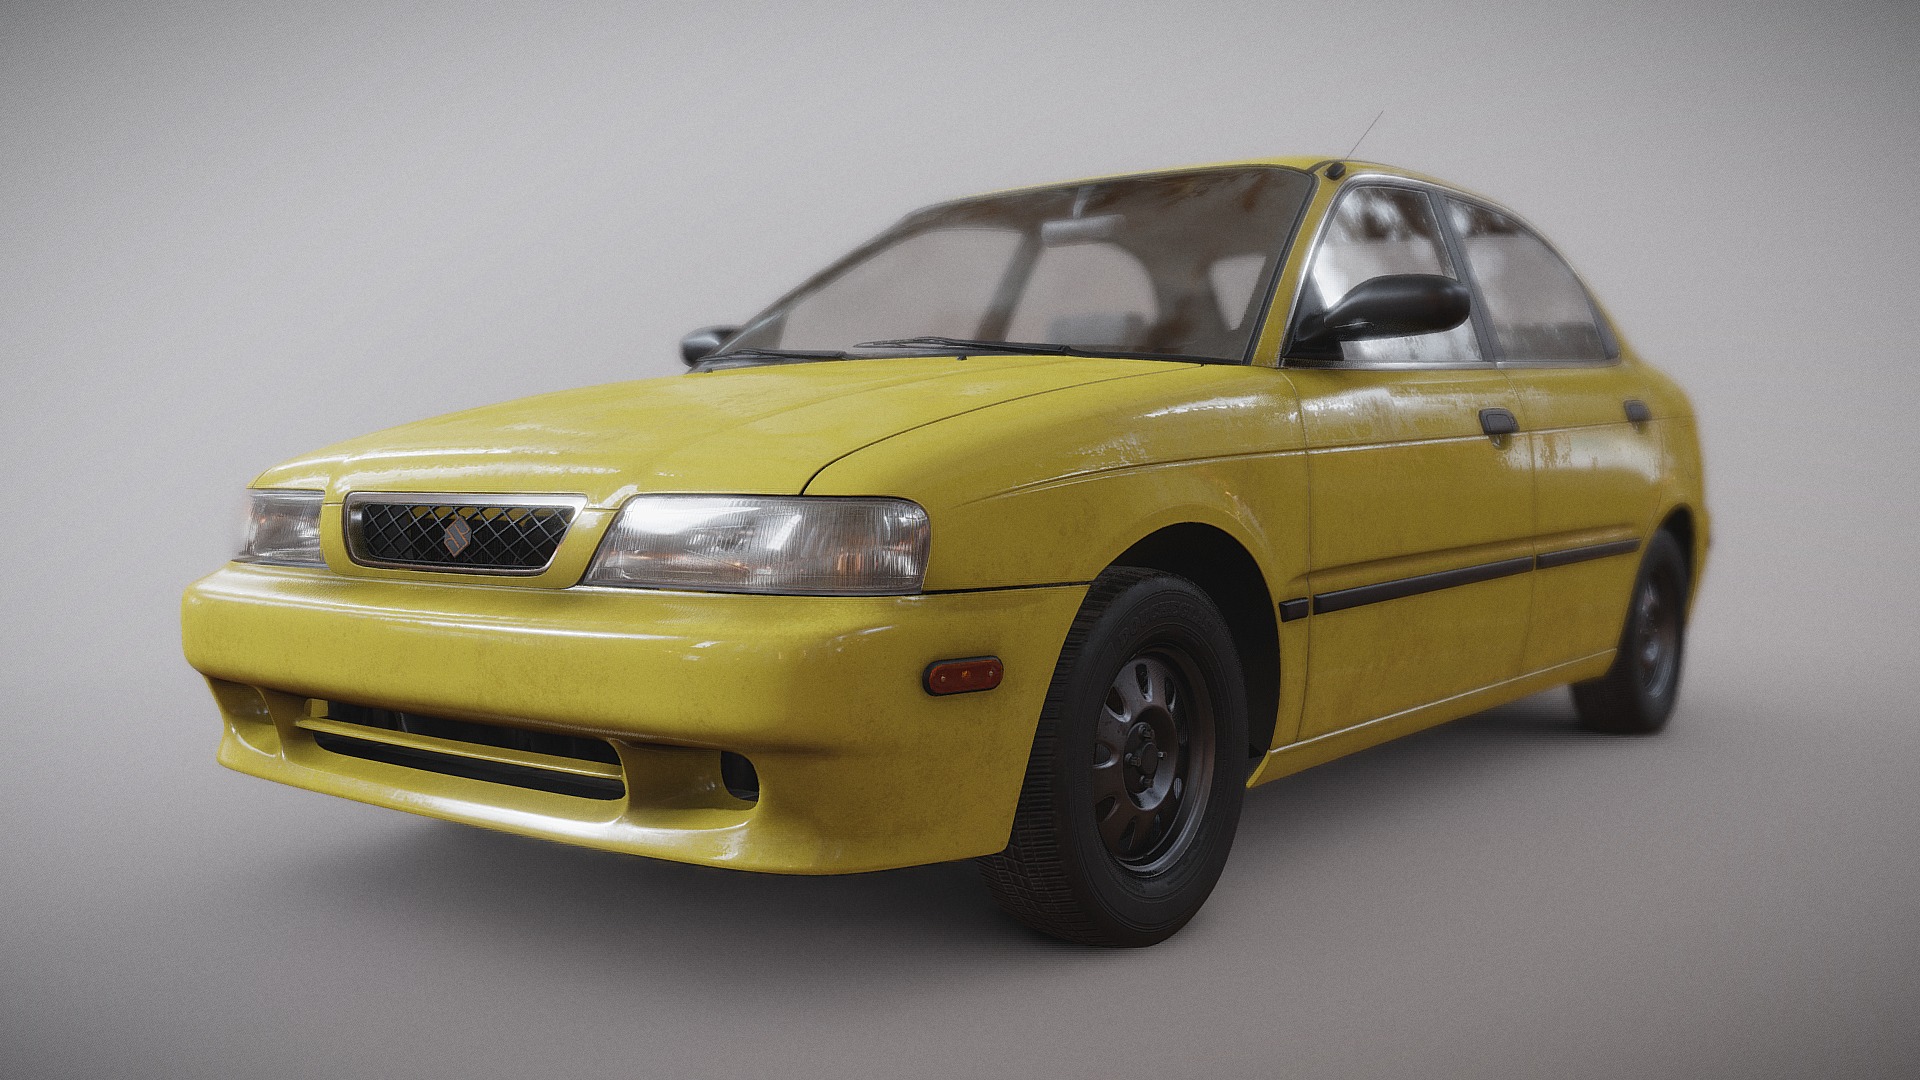 3D model Suzuki Esteem 1998 - This is a 3D model of the Suzuki Esteem 1998. The 3D model is about a yellow car with a white background.